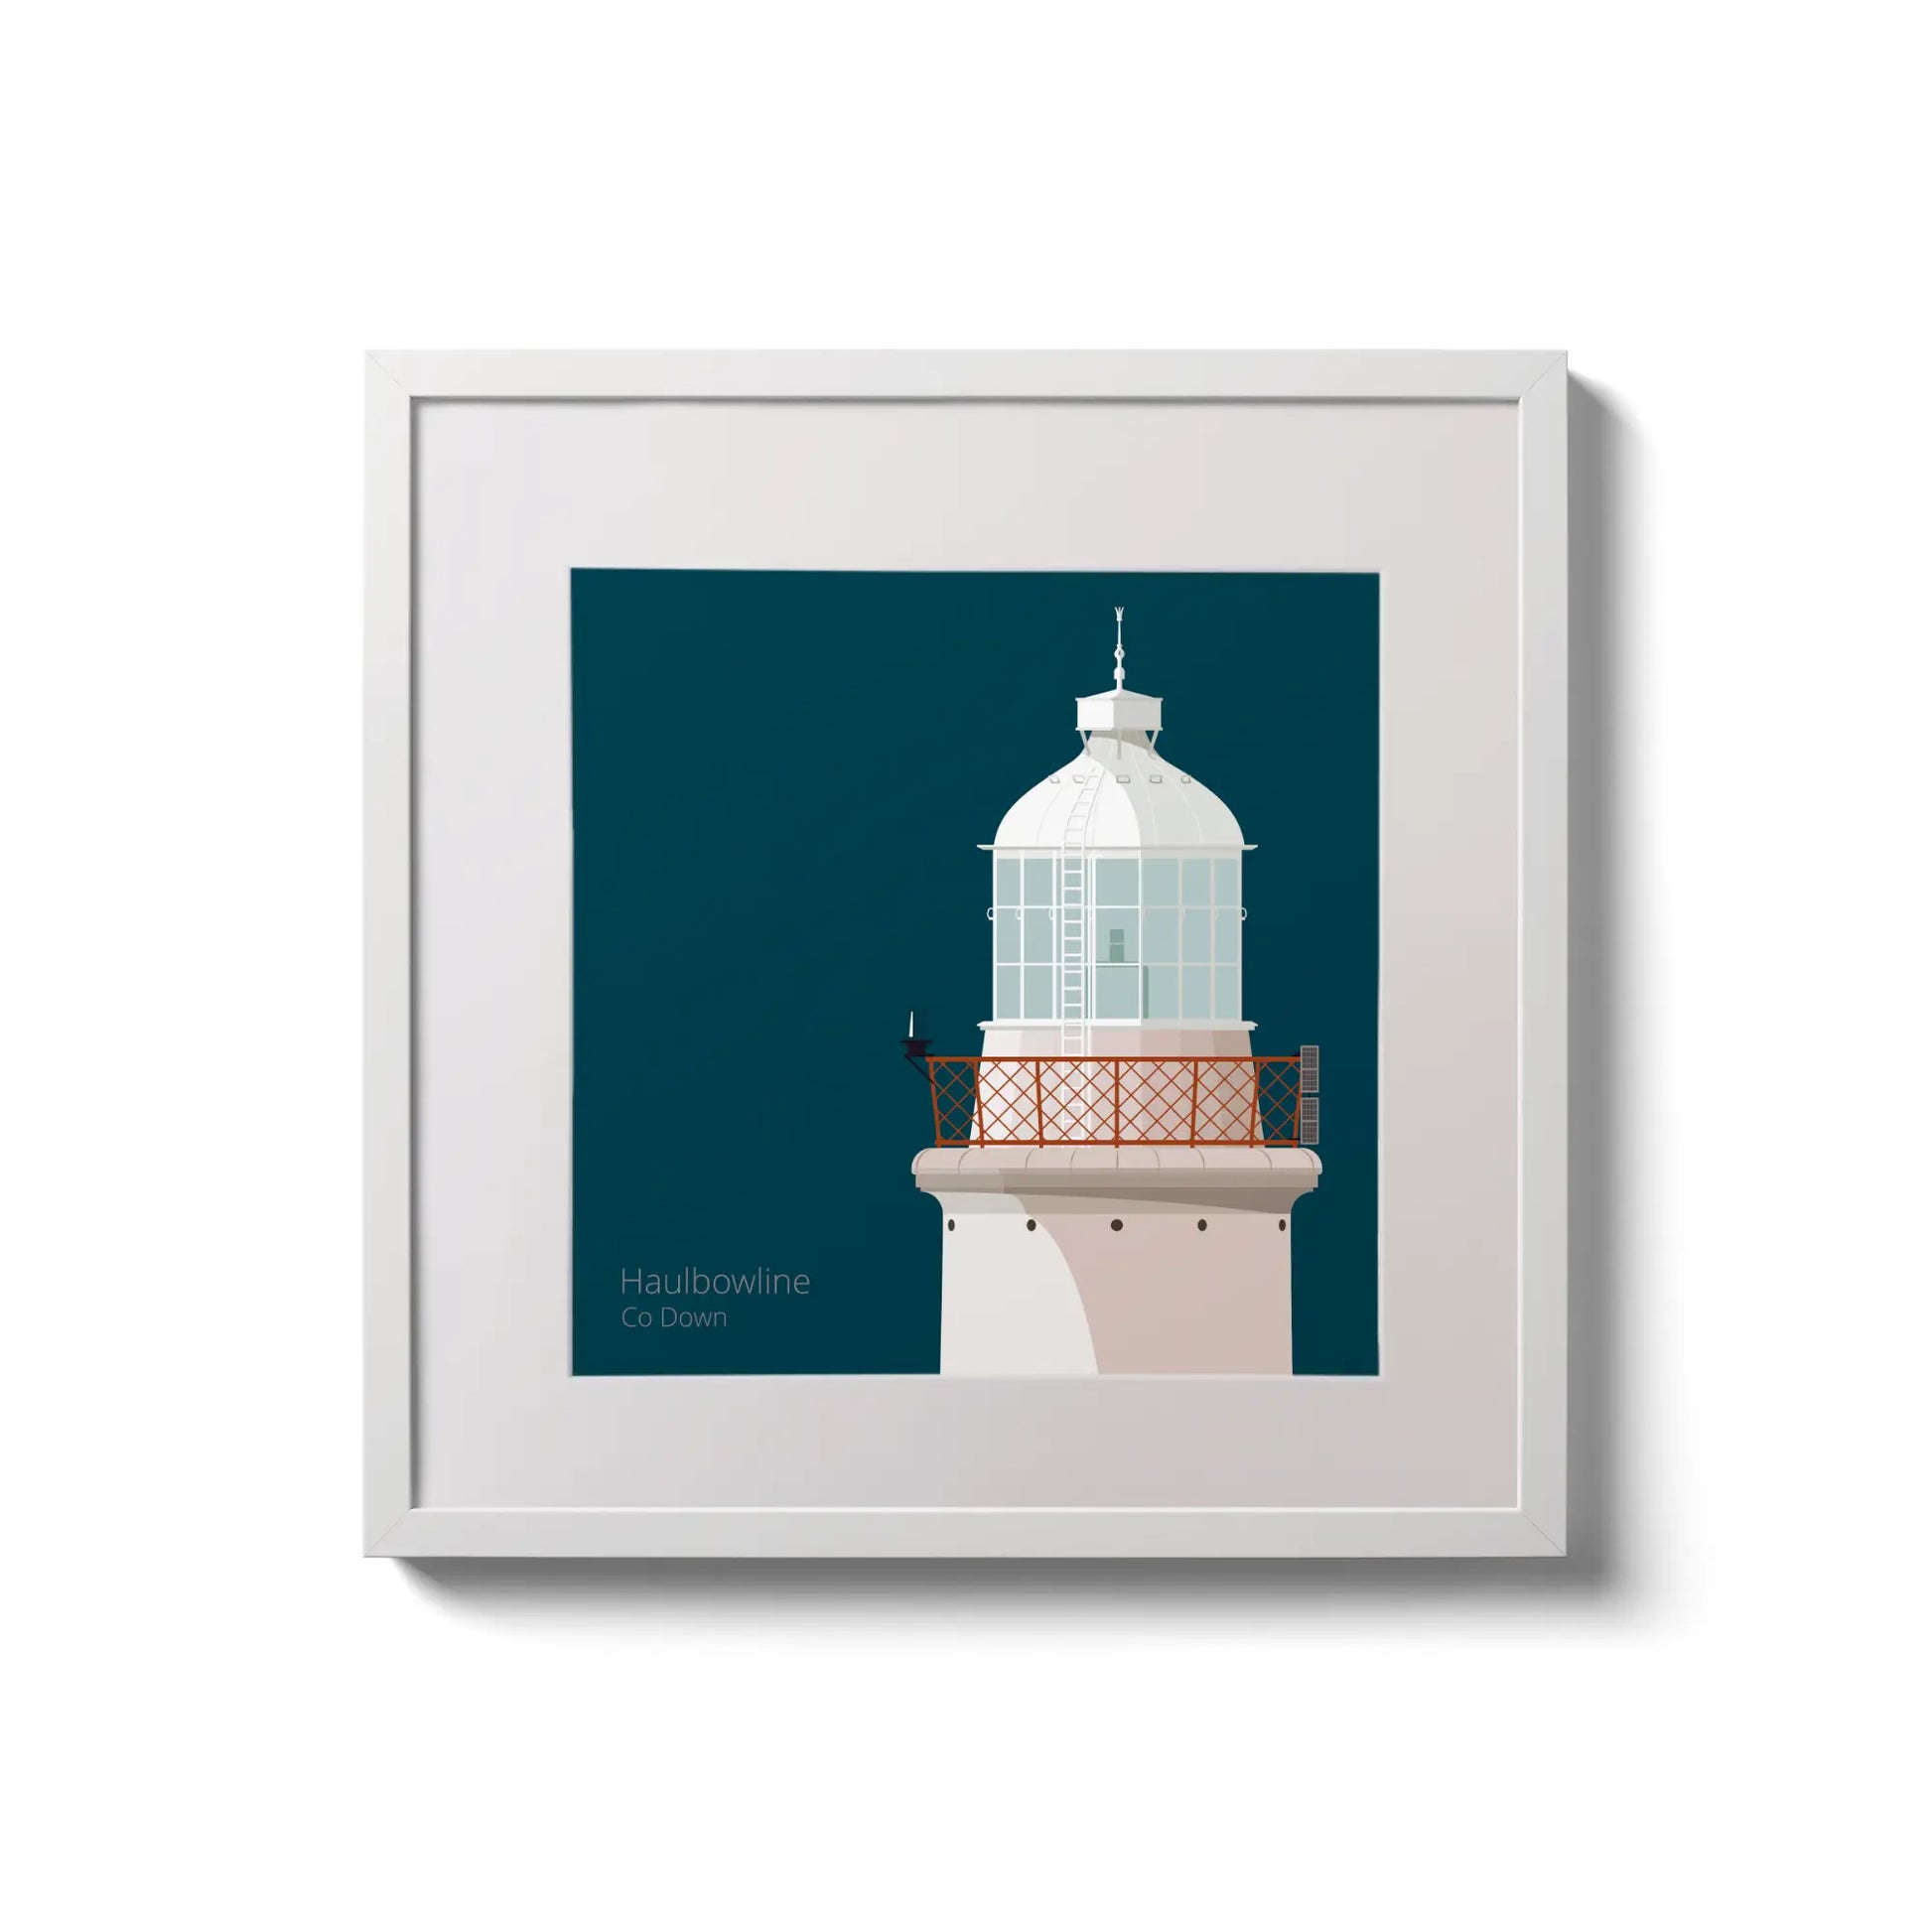 Illustration of Haulbowline lighthouse on a midnight blue background,  in a white square frame measuring 20x20cm.